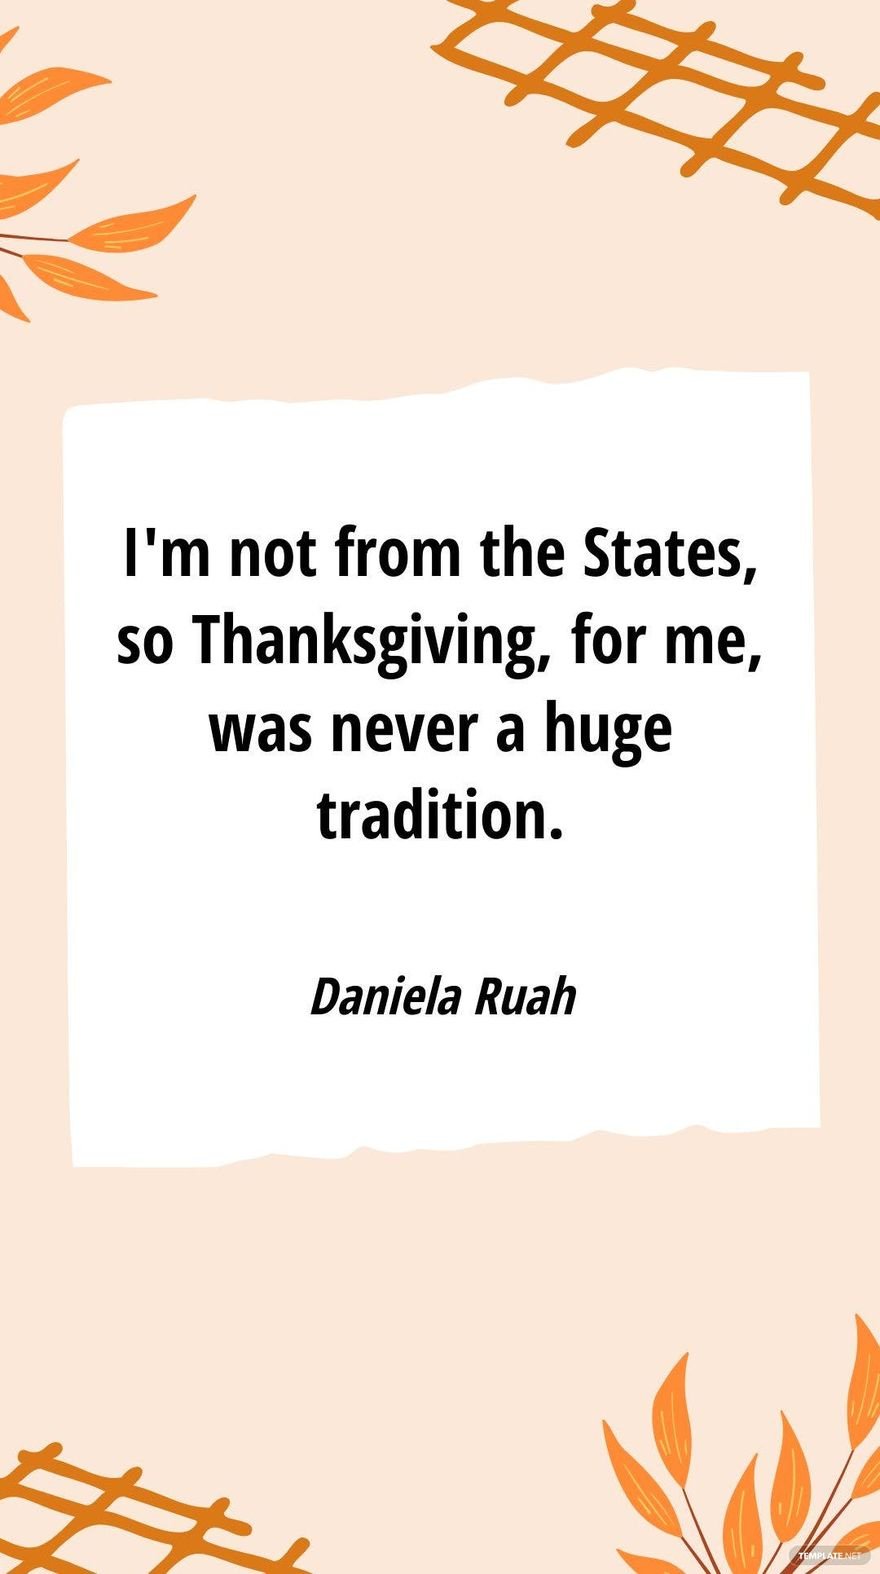 Daniela Ruah - I'm not from the States, so Thanksgiving, for me, was never a huge tradition.